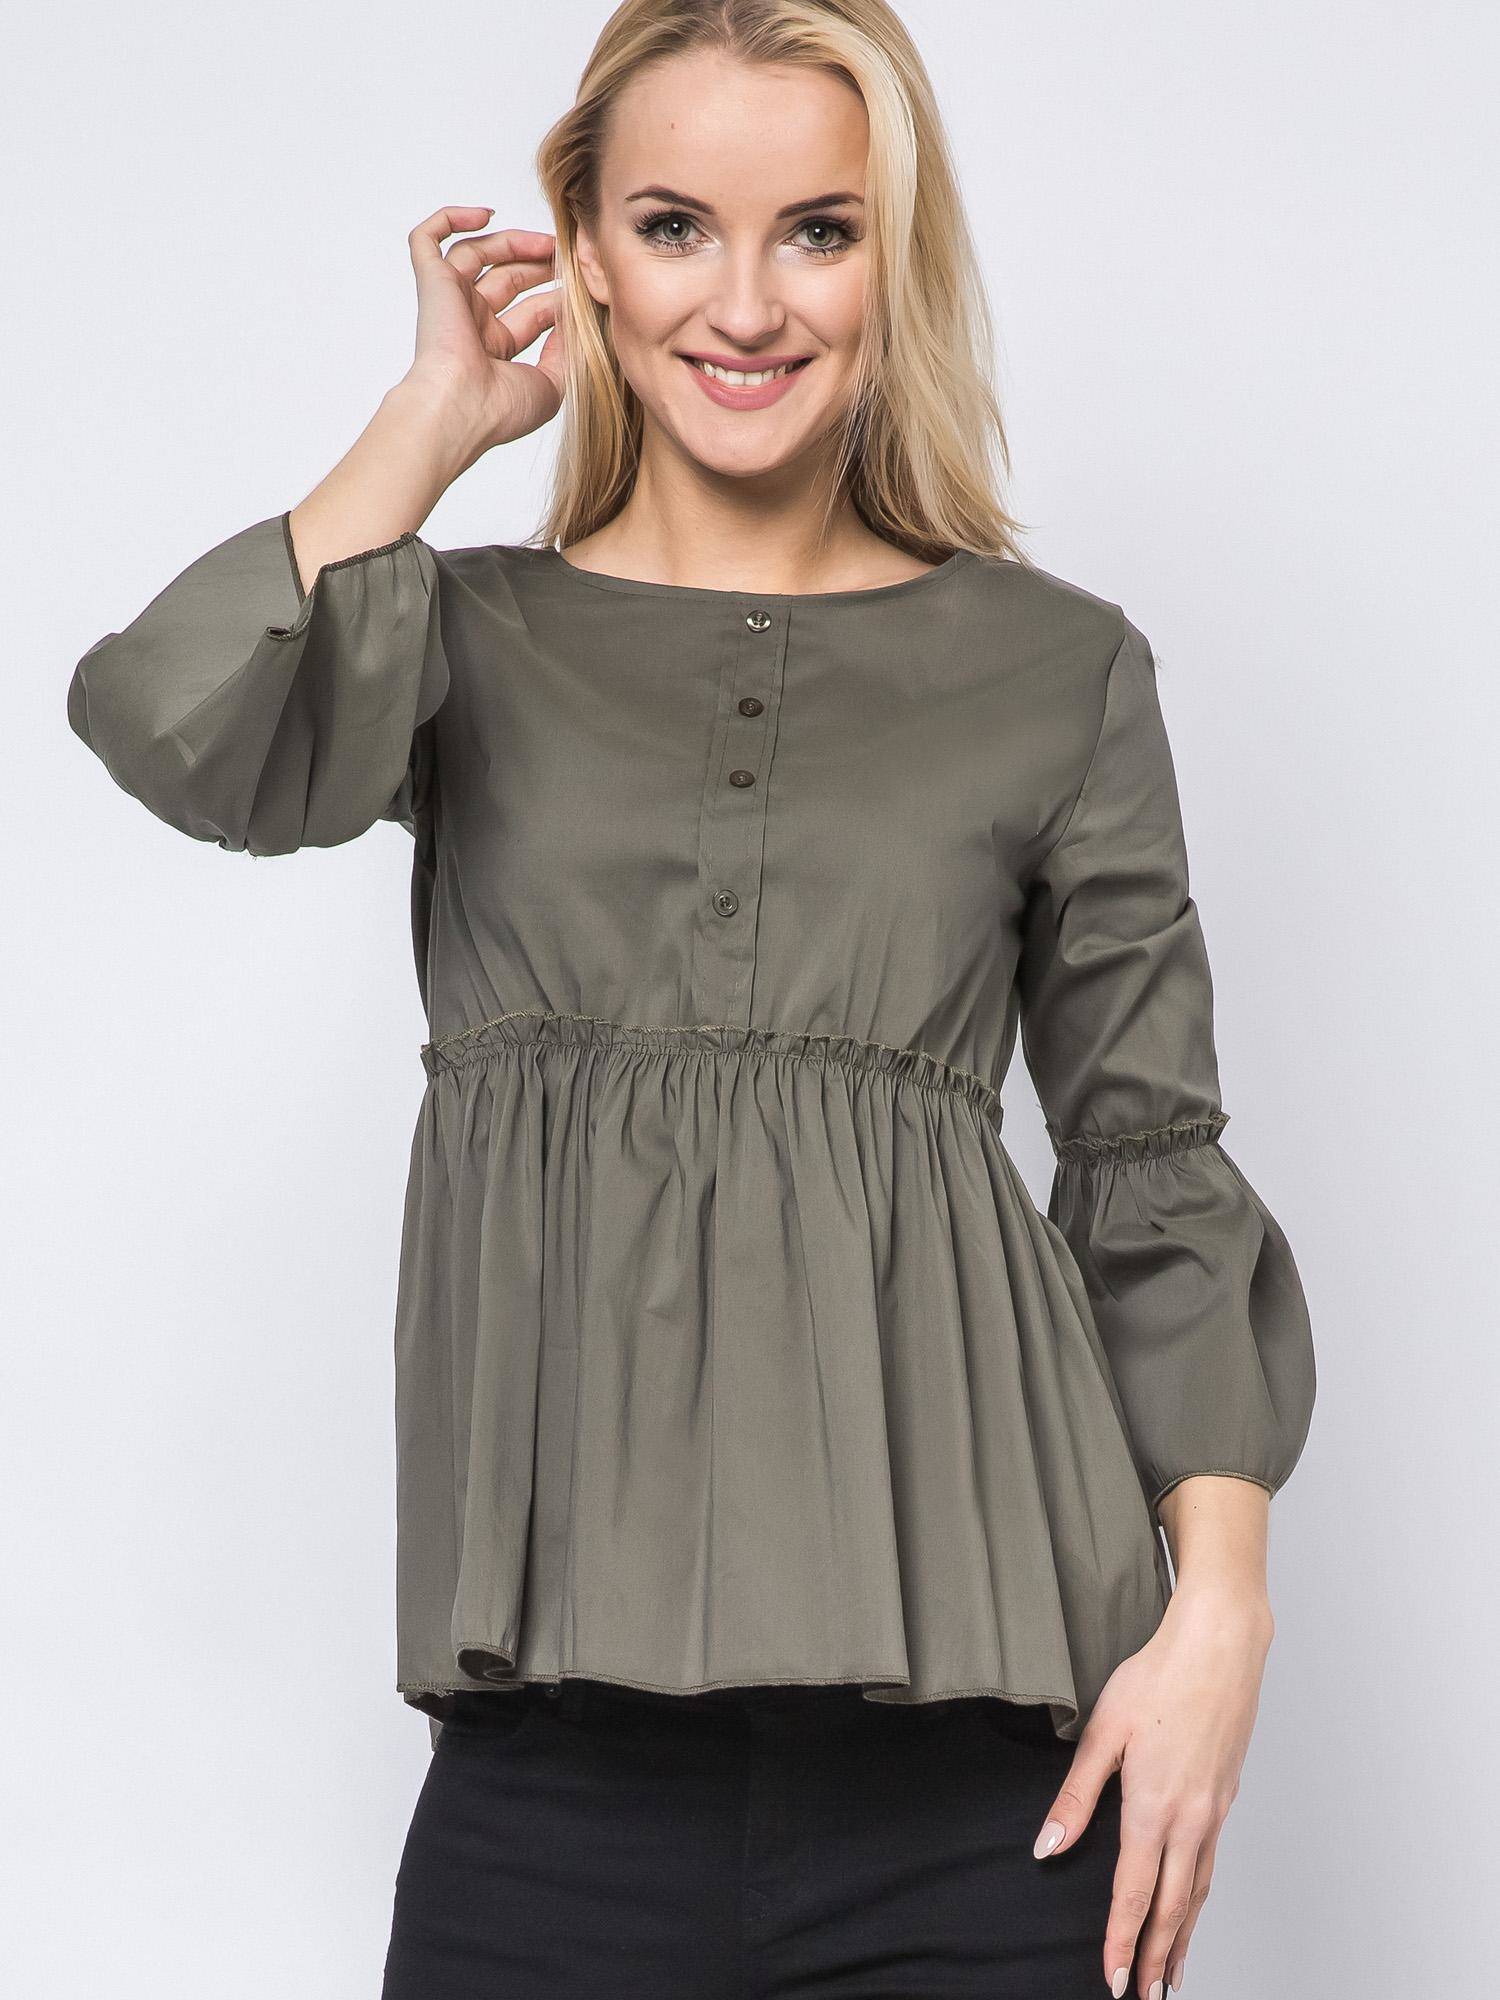 Blouse with frills and lace-up khaki neckline